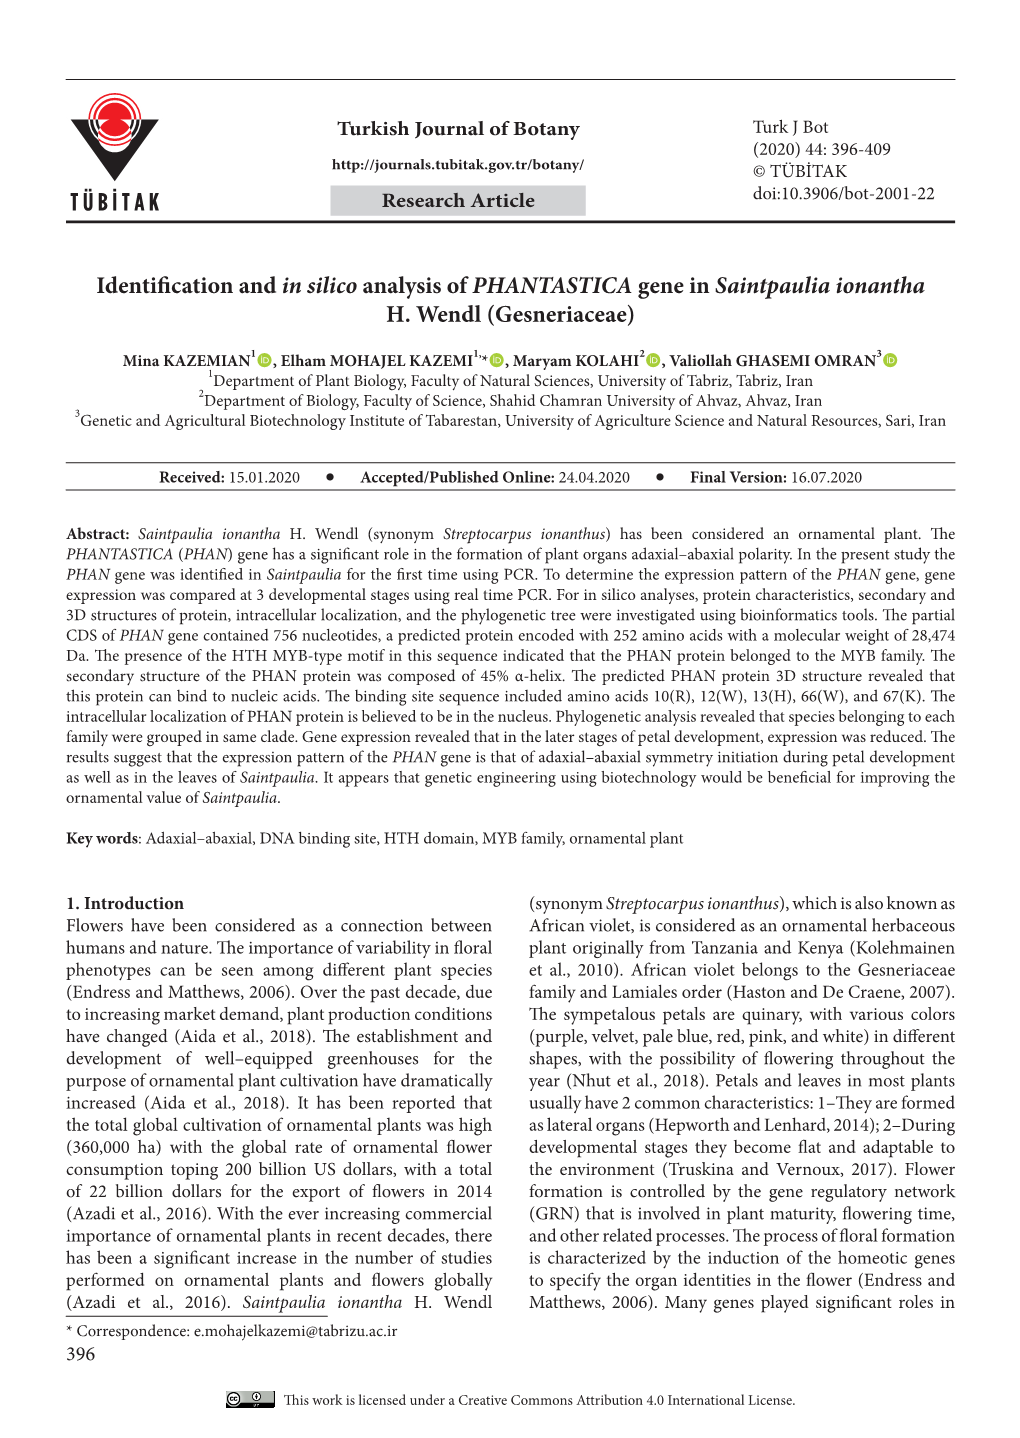 Identification and in Silico Analysis of PHANTASTICA Gene In